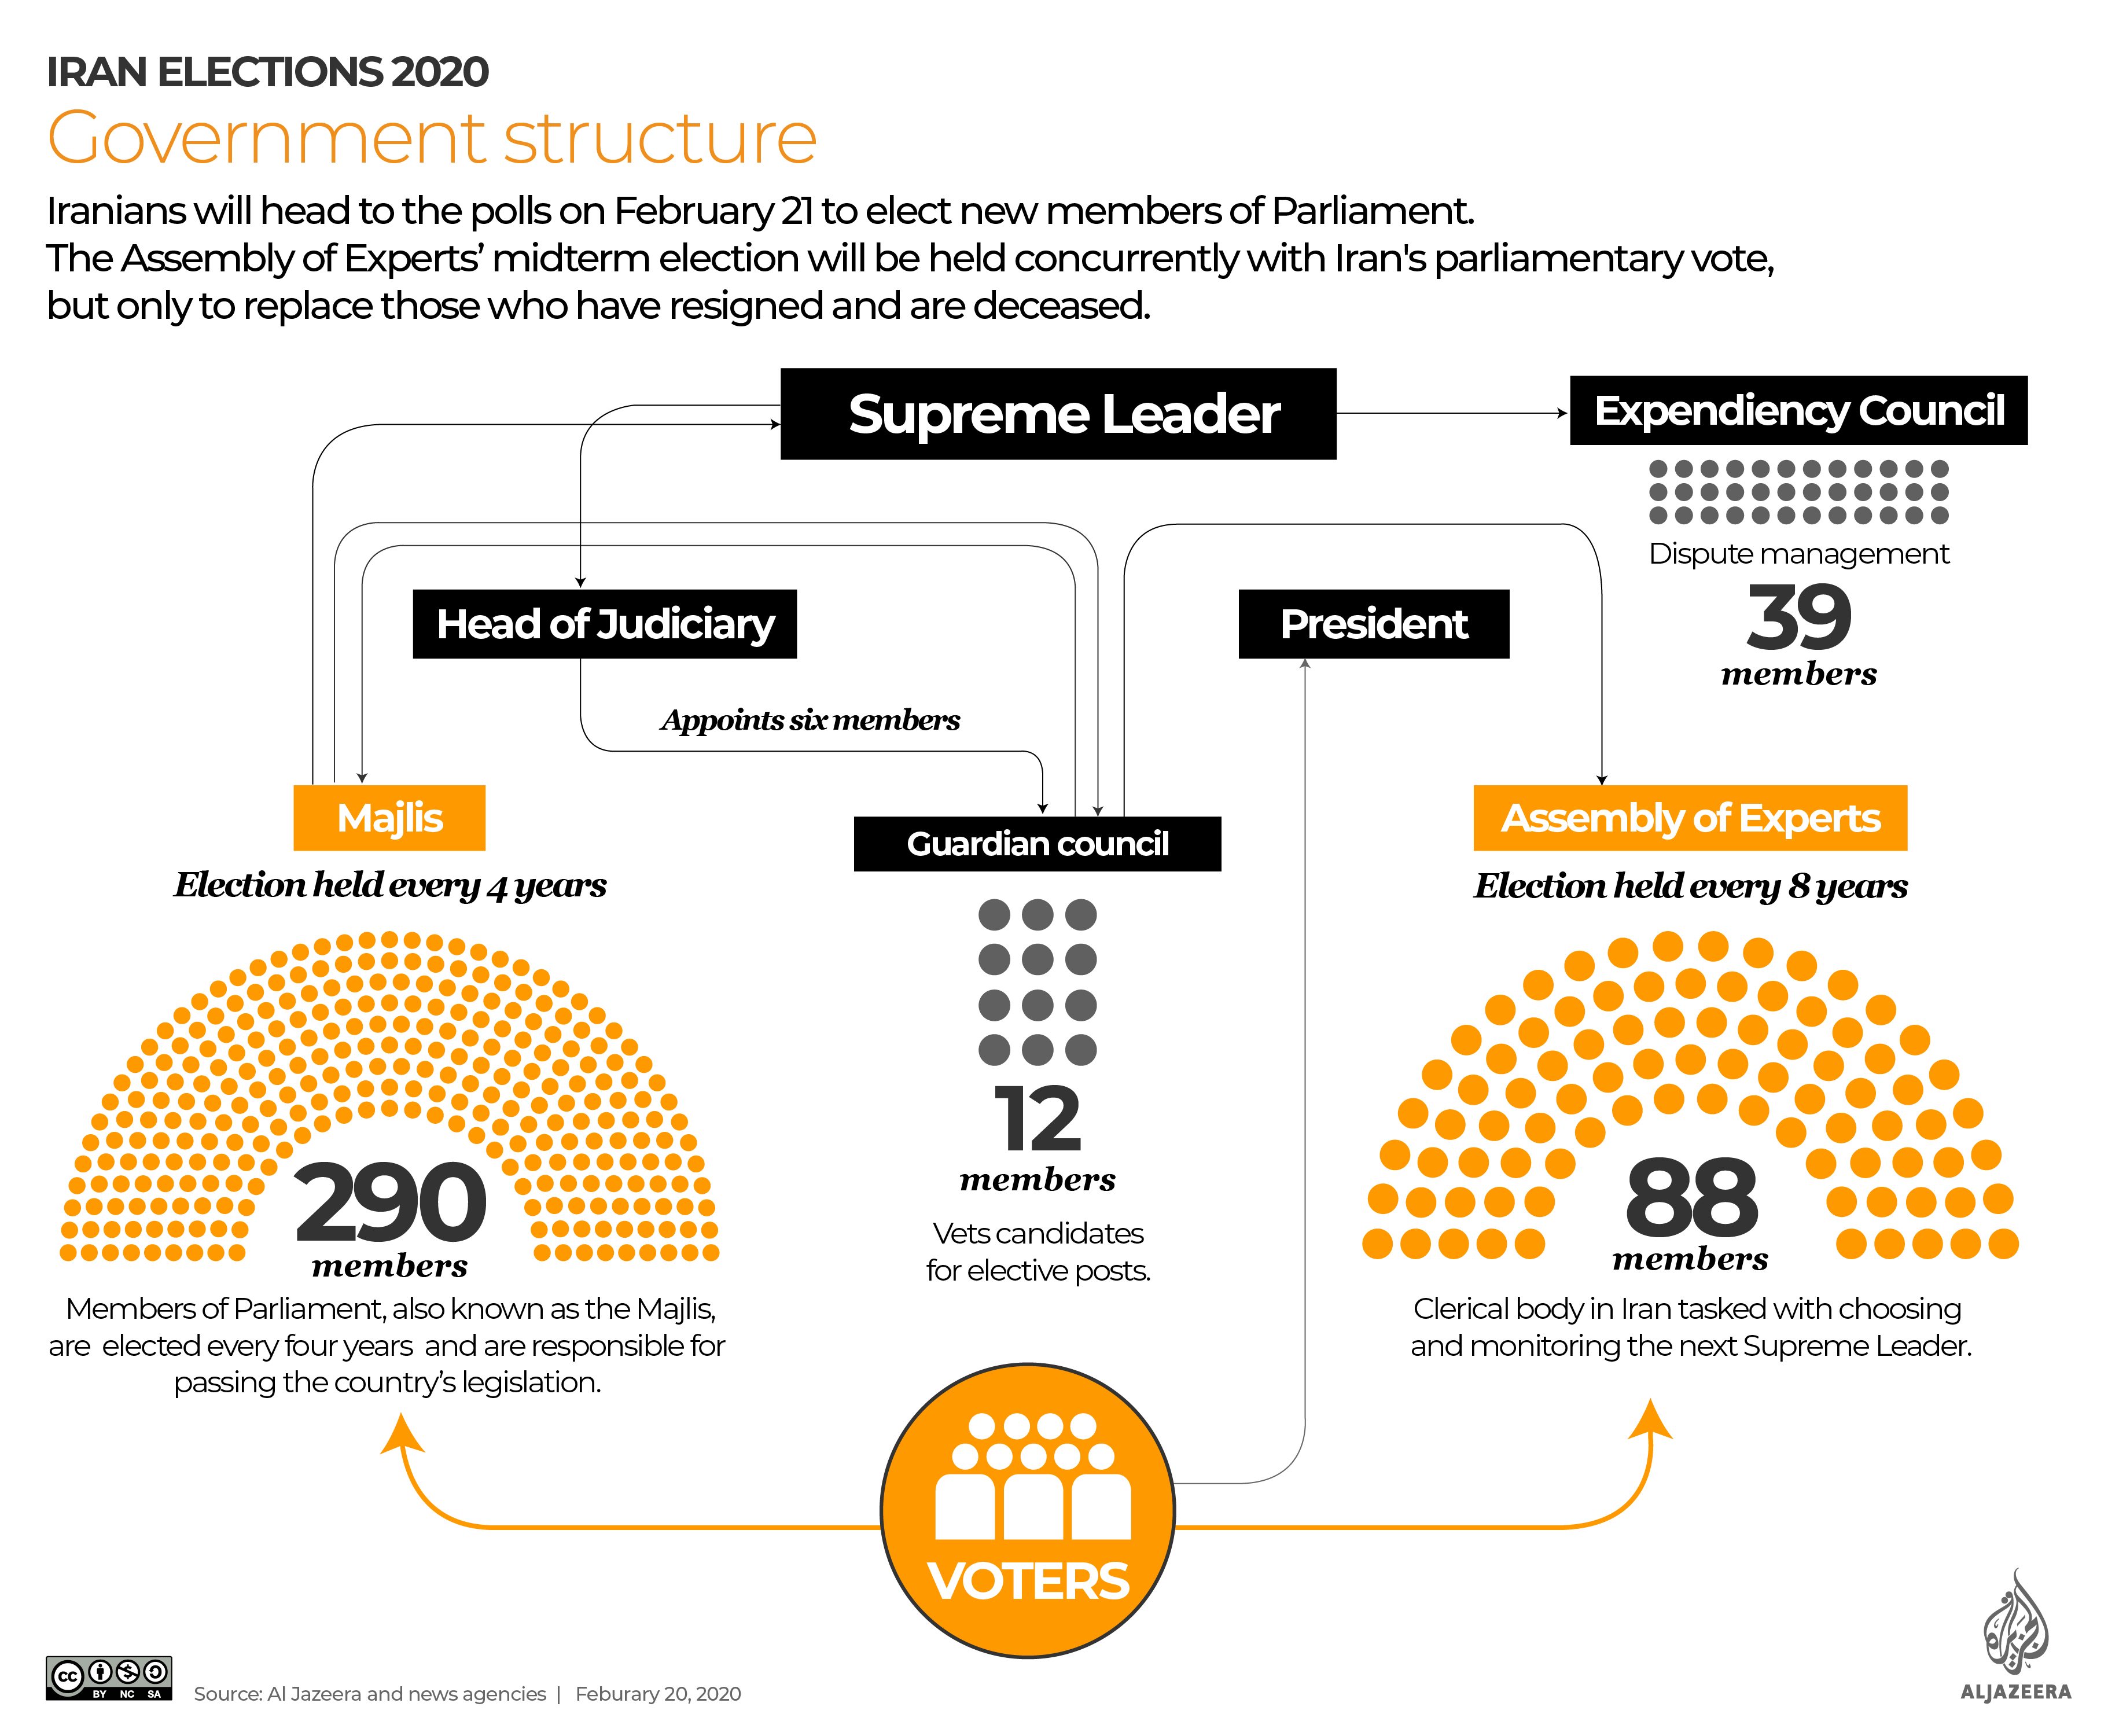 INTERACTIVE: Iran parliamentary elections 2020 - Government structure 